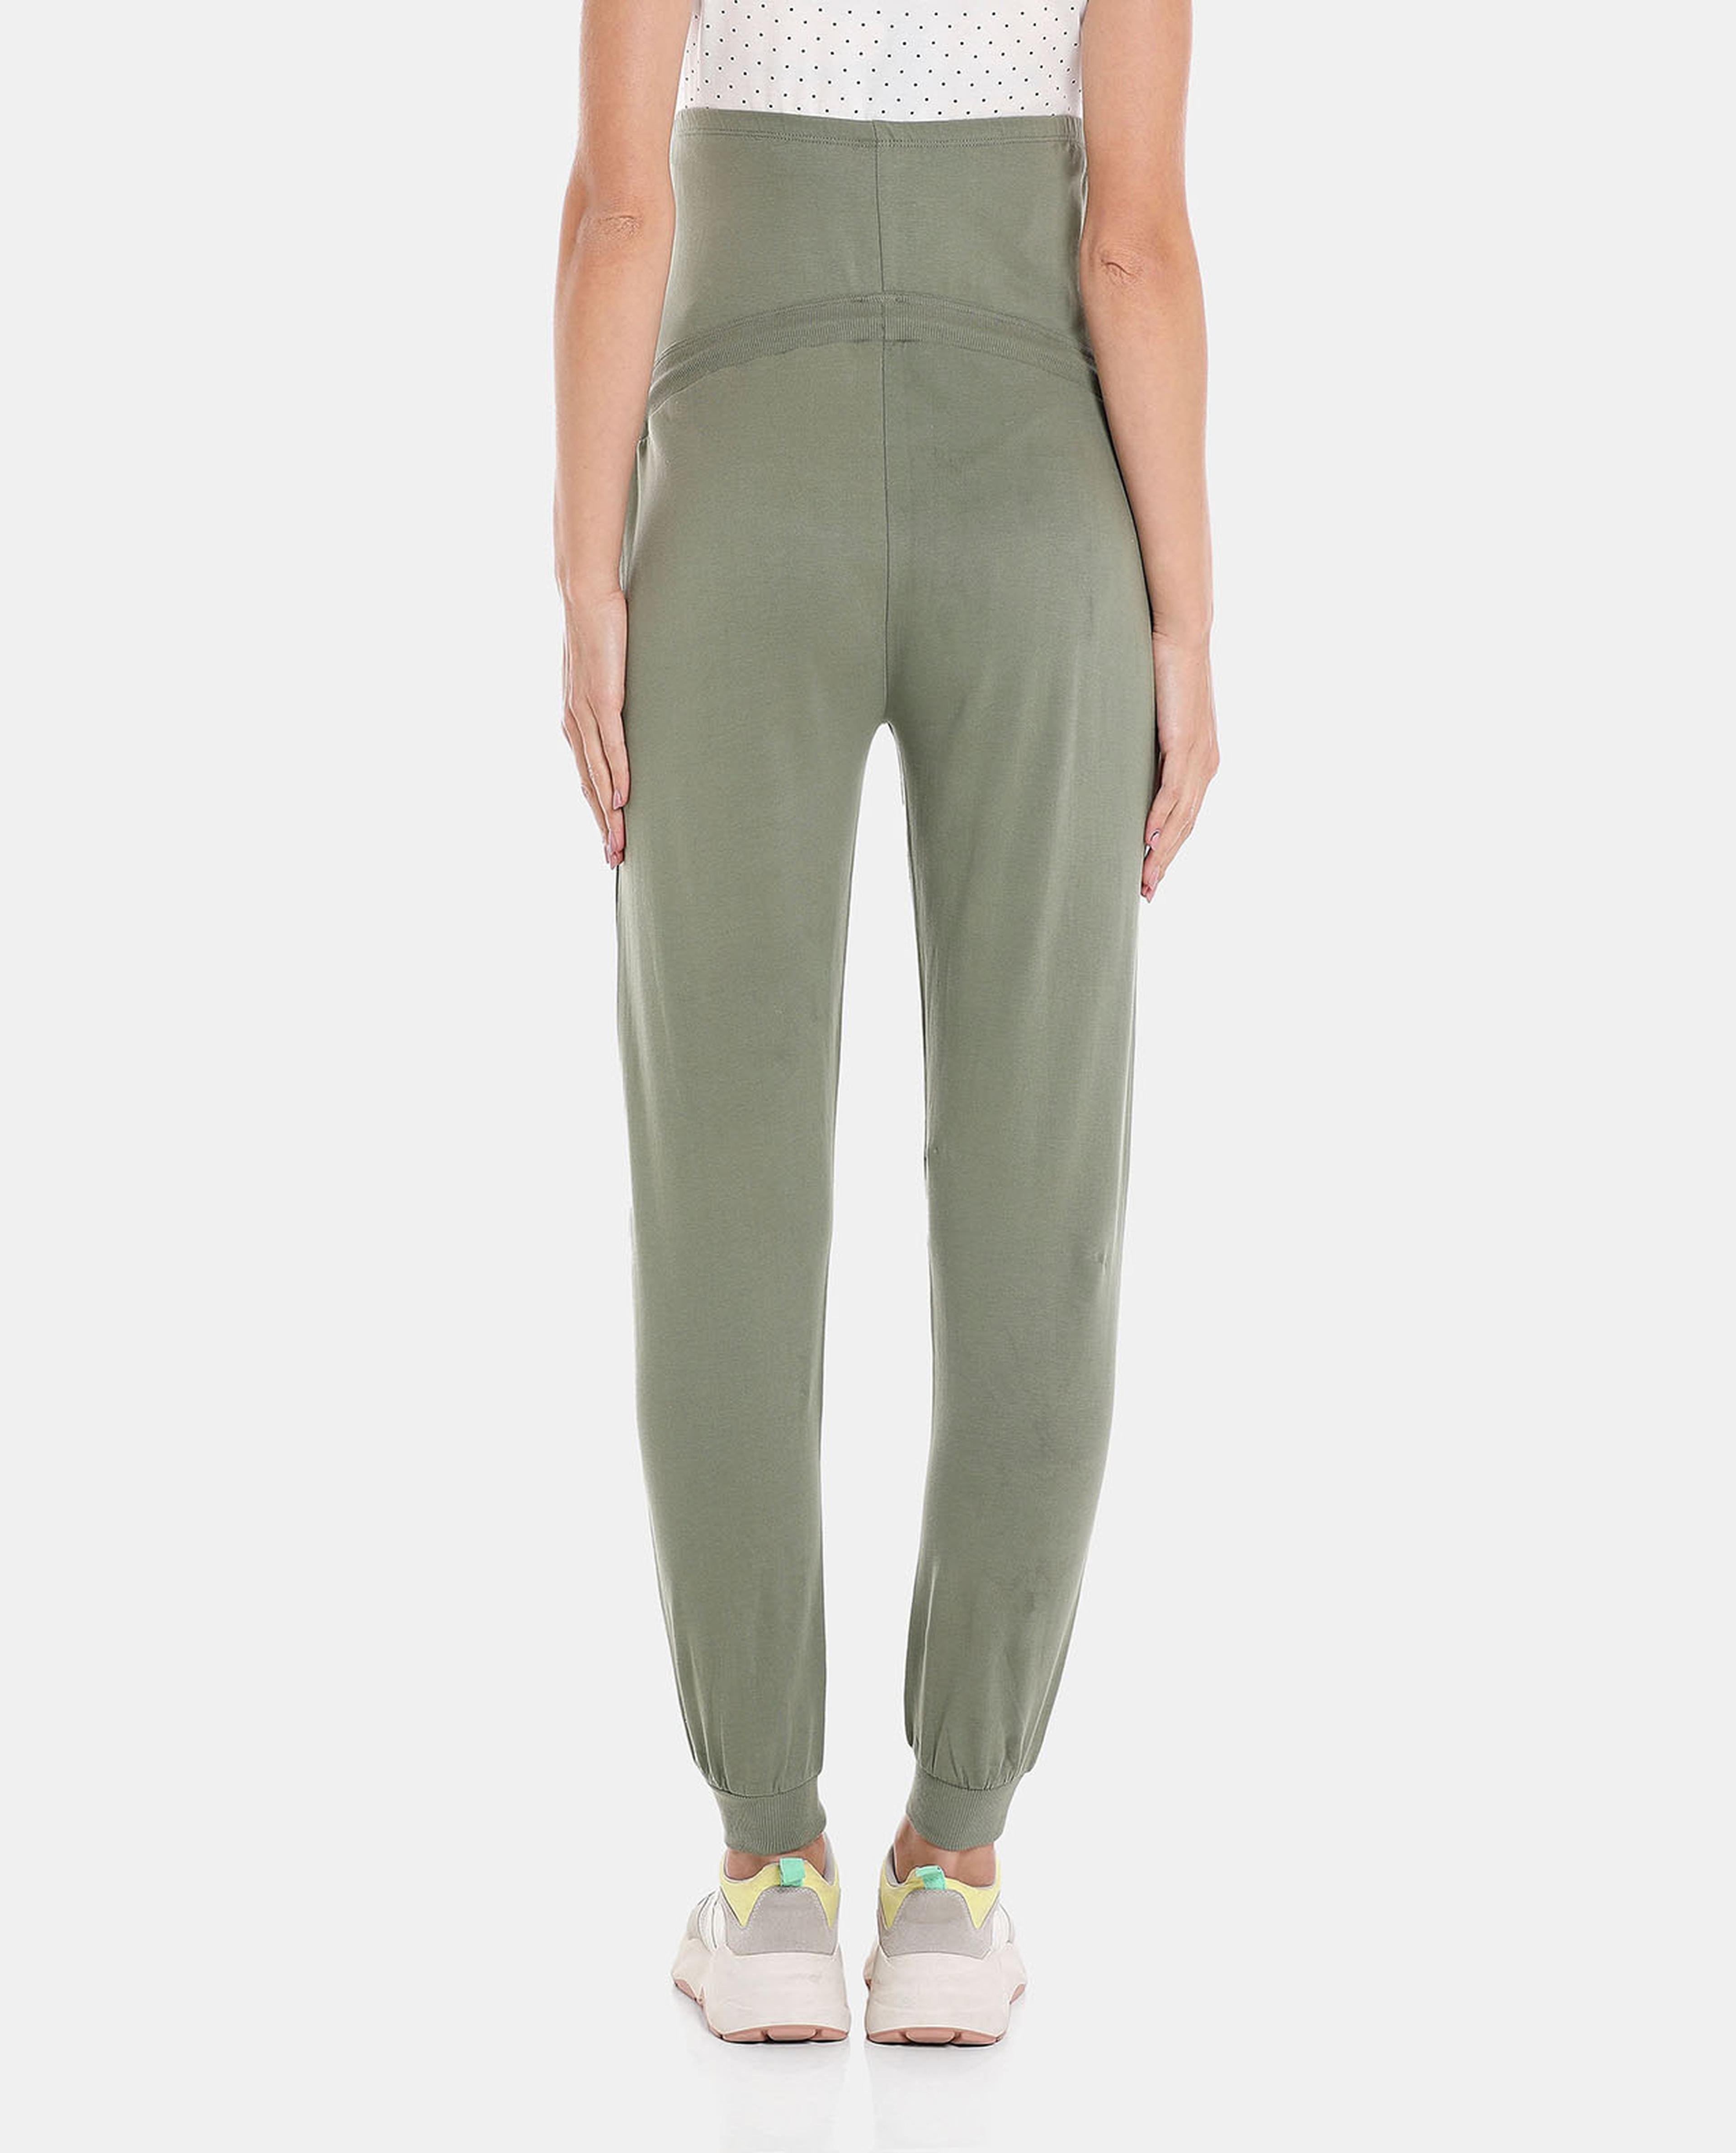 Green Solid Maternity Knit Joggers